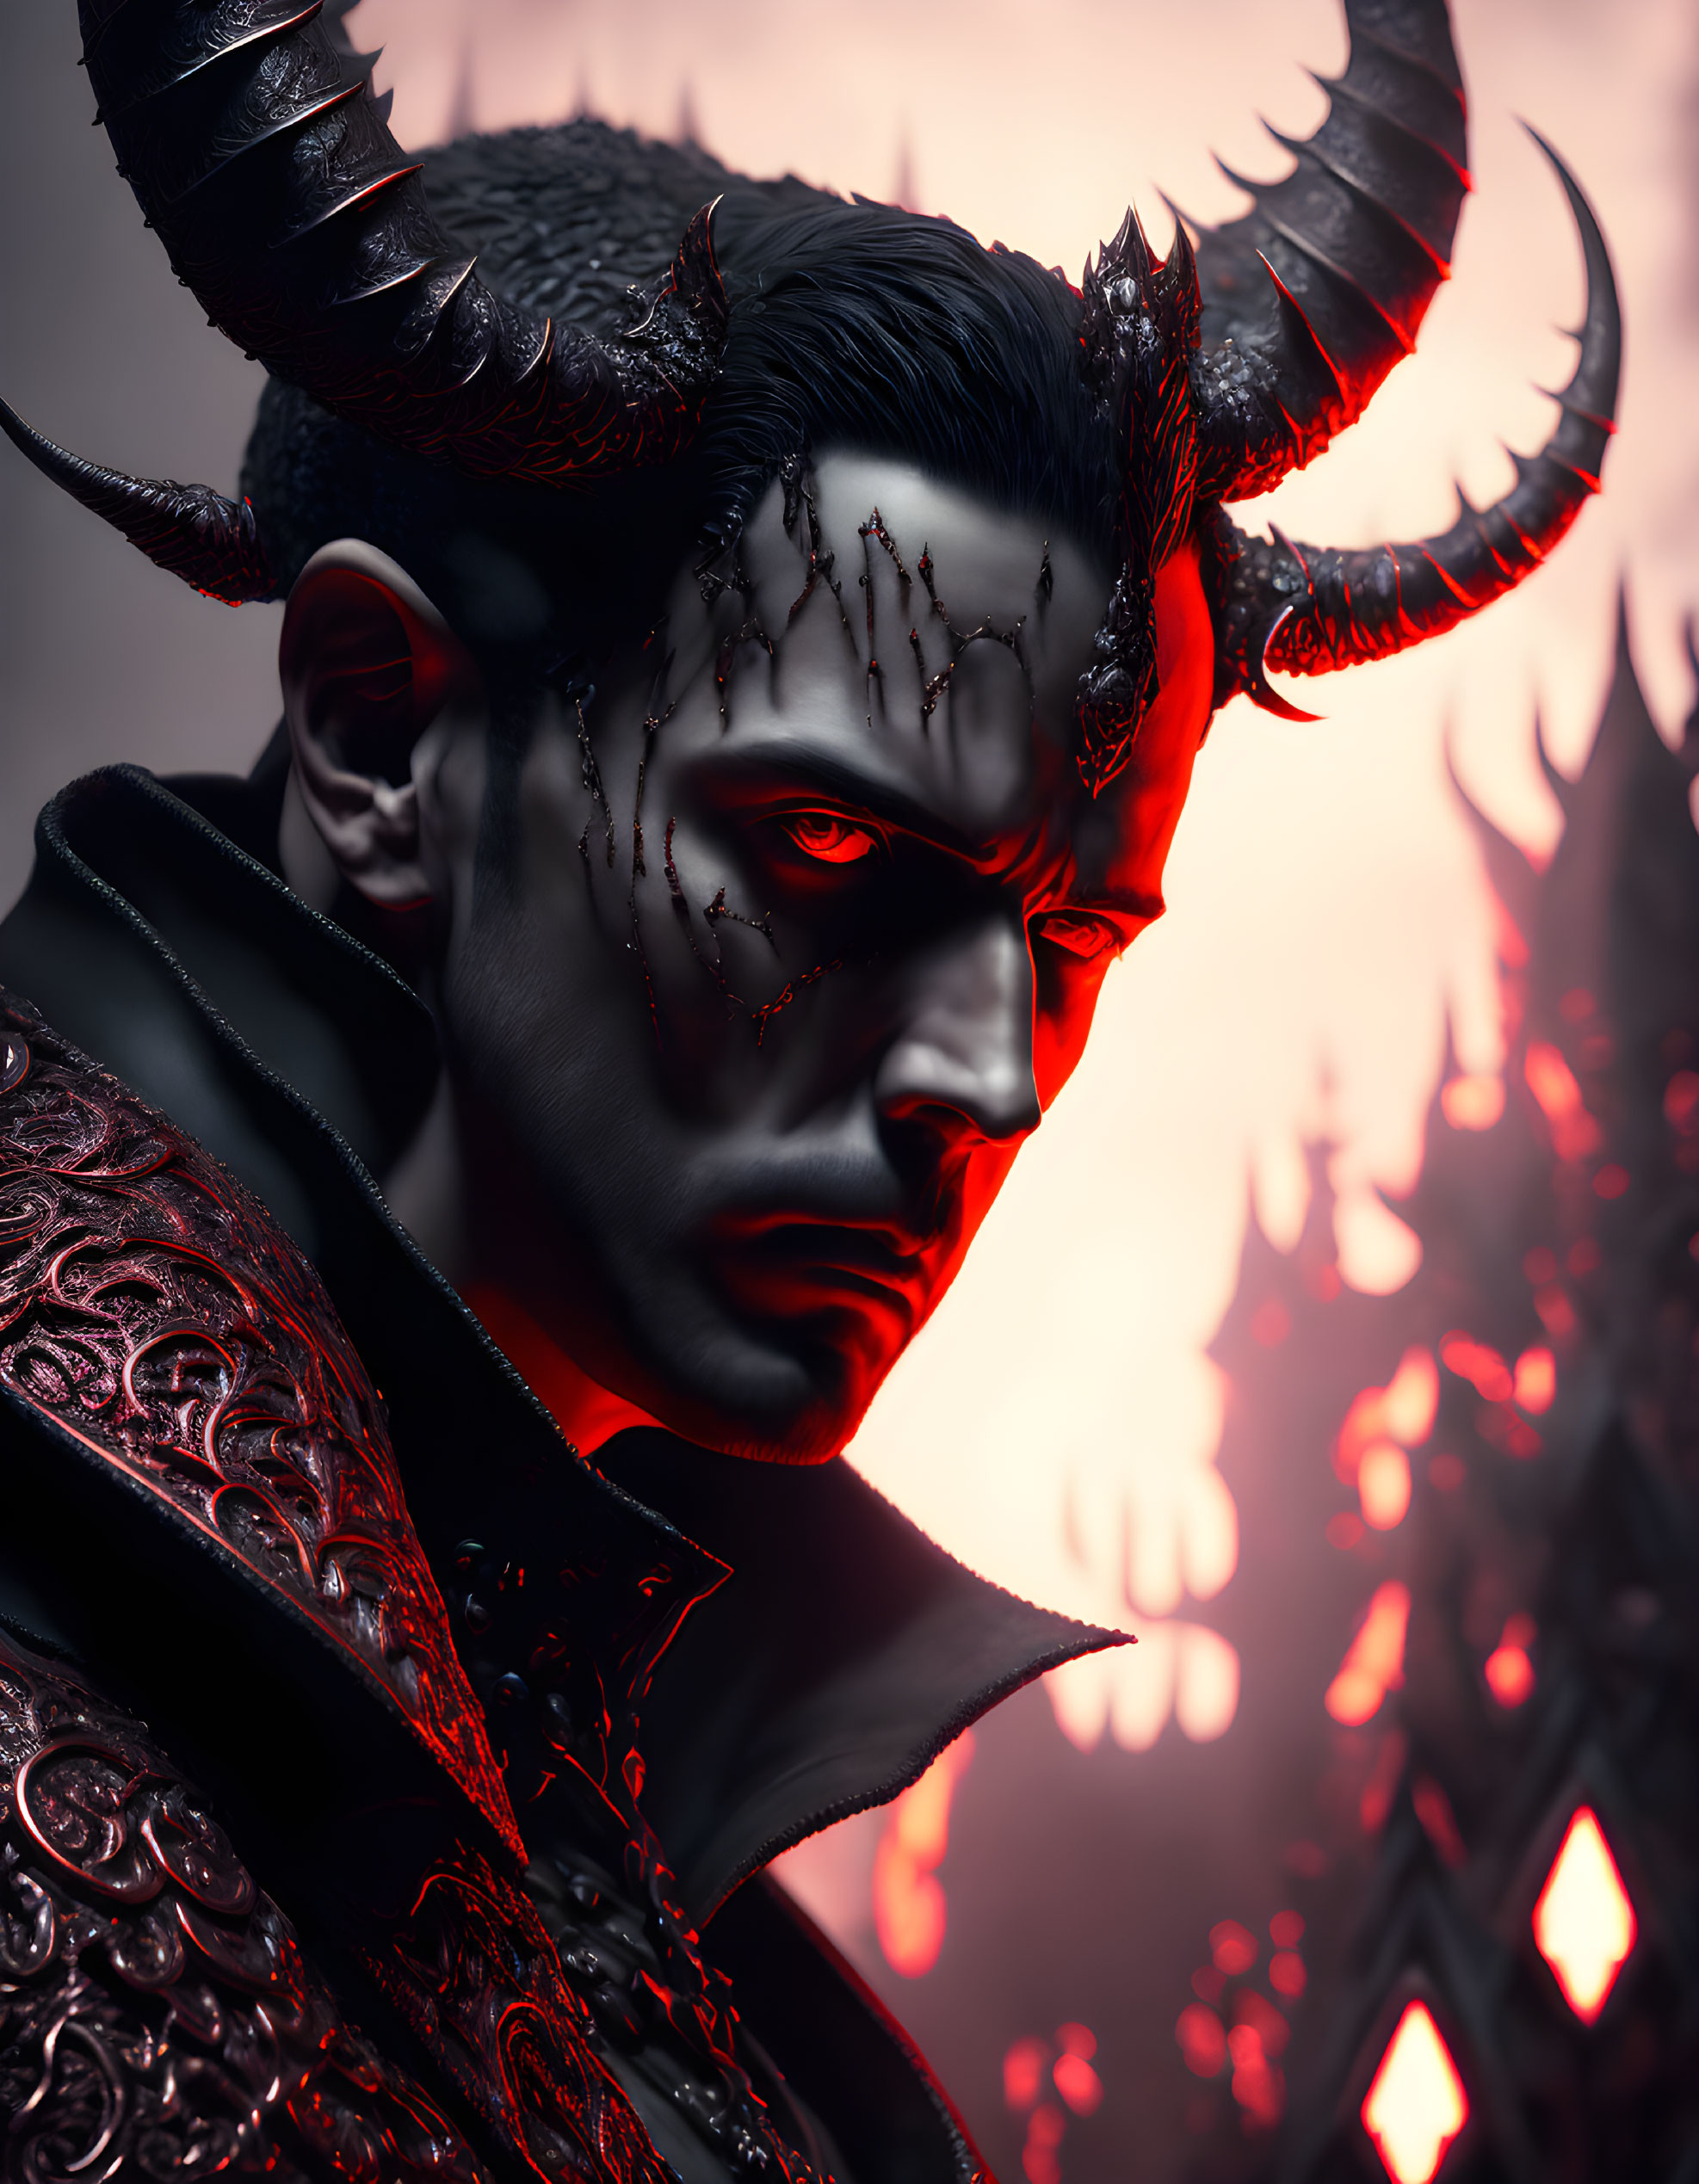 Male character with black horns and red eyes in dramatic portrait